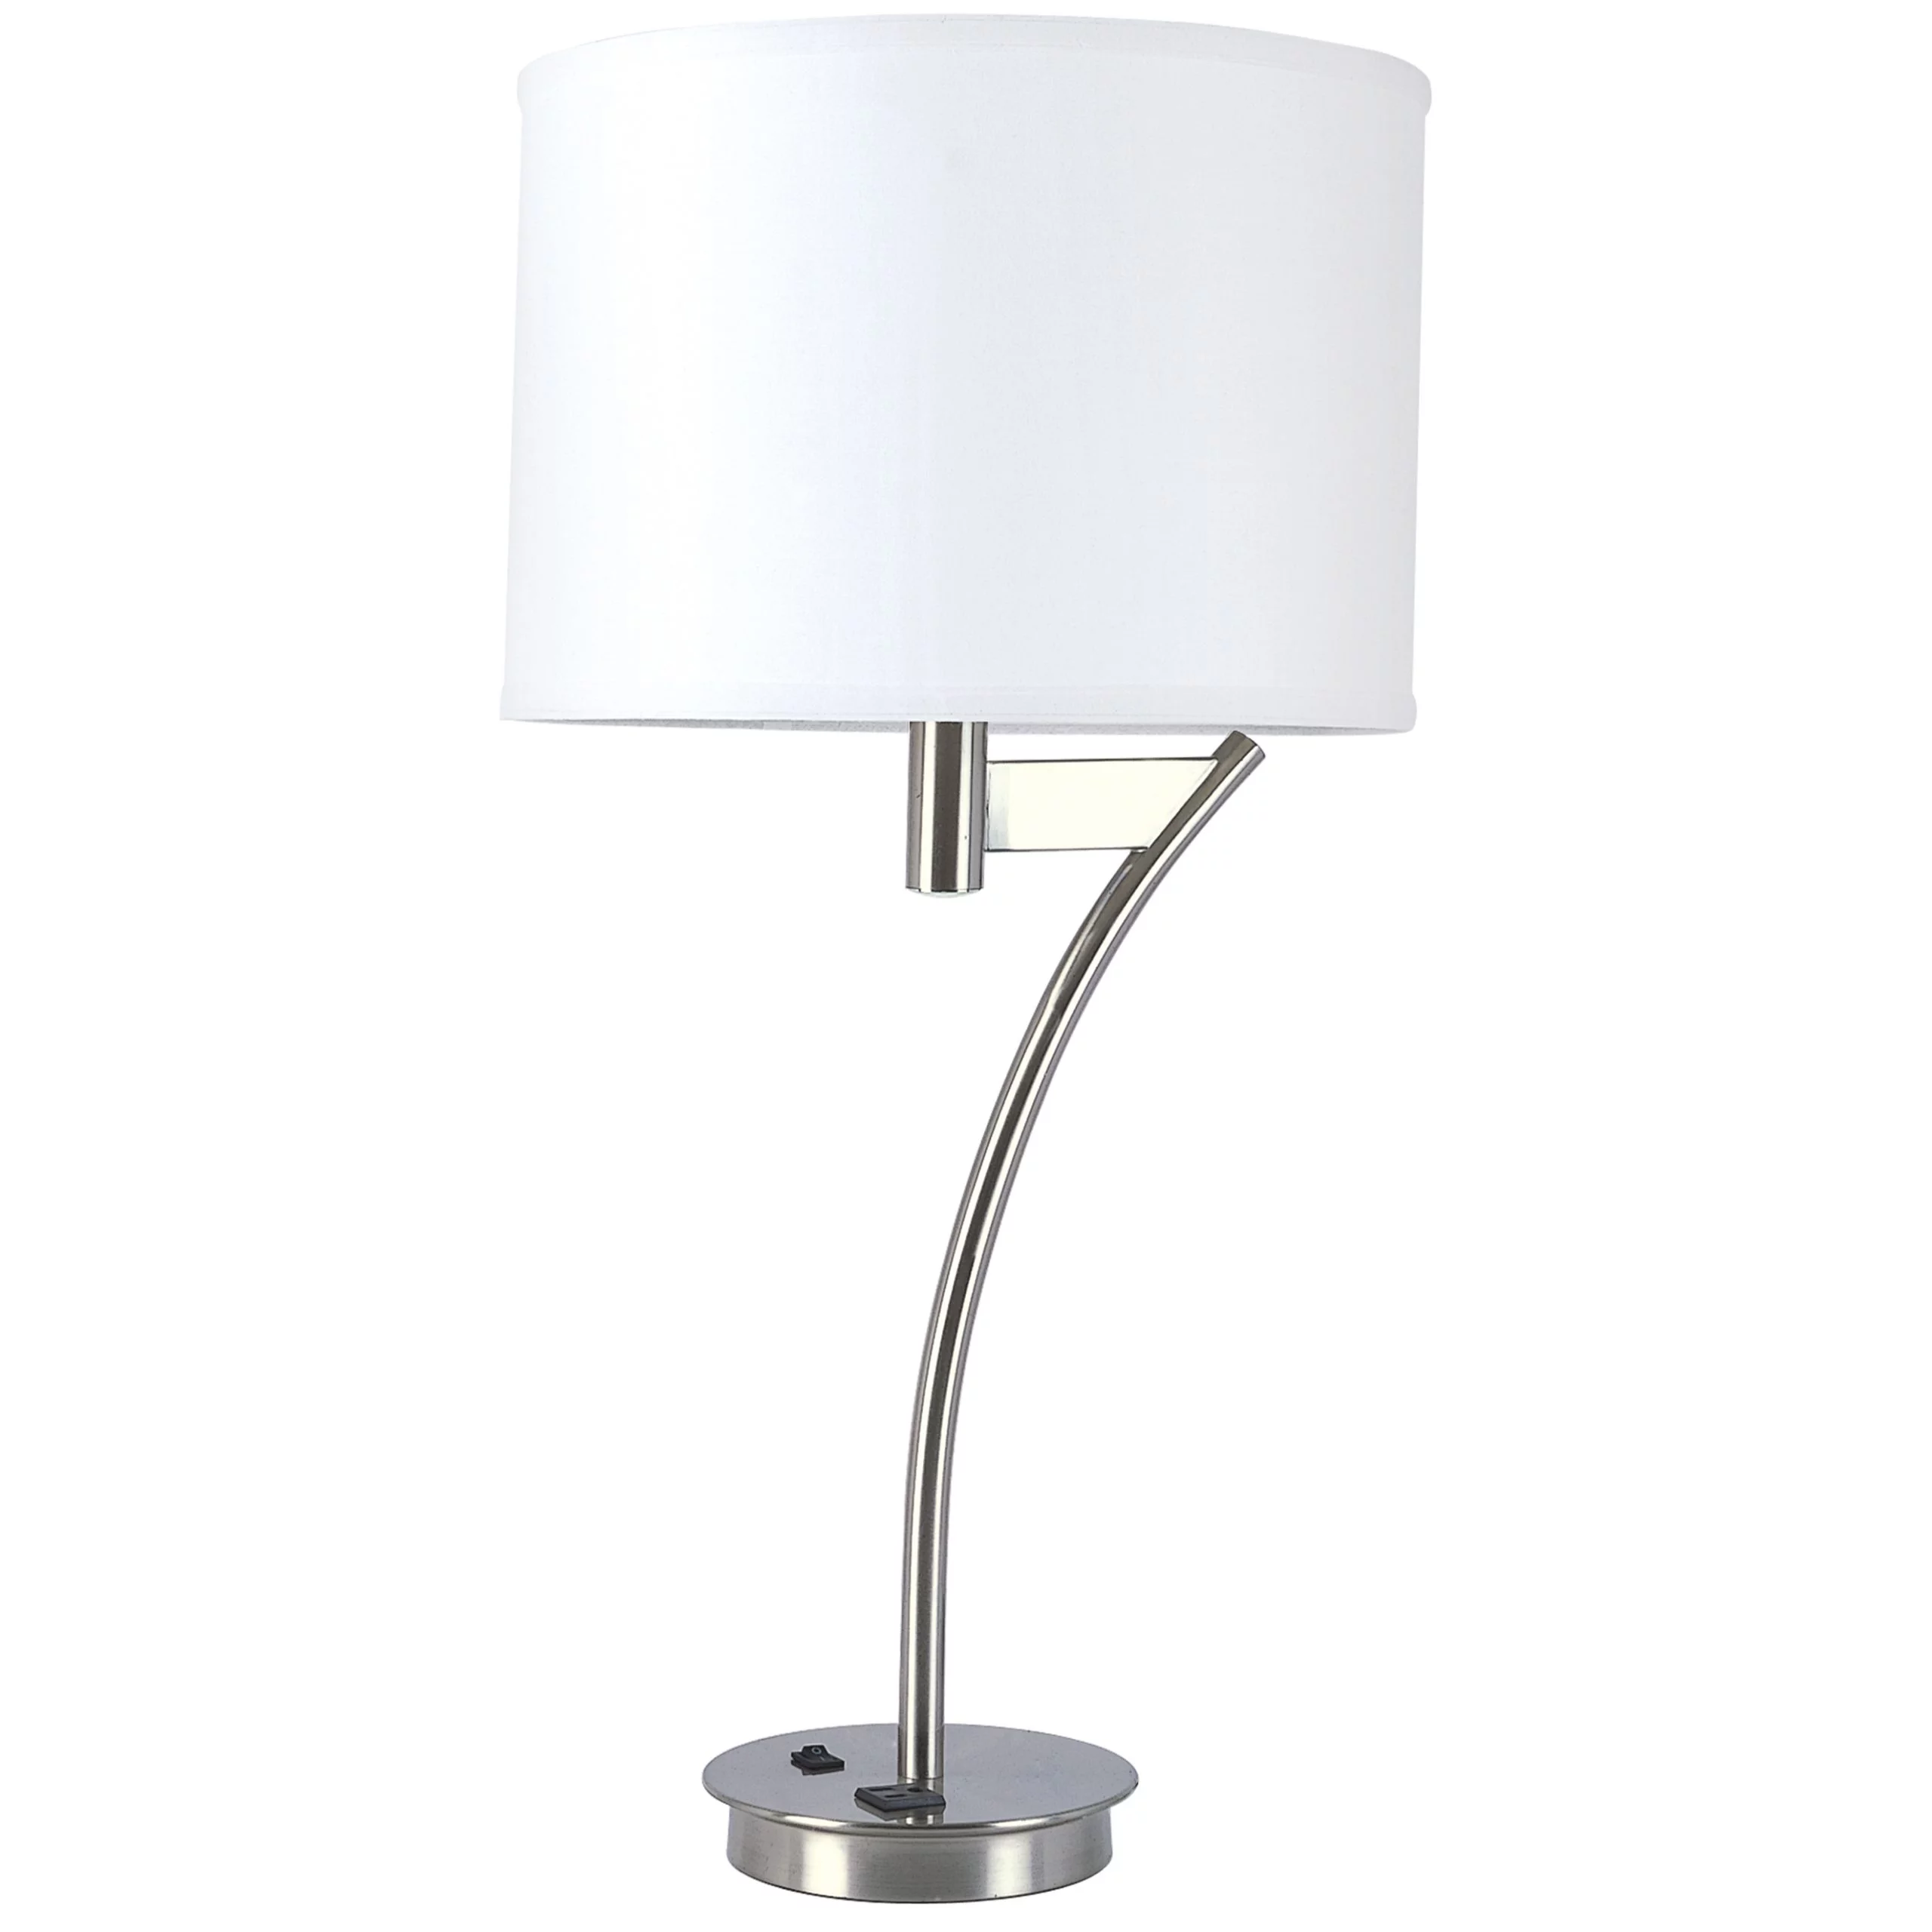 Corbel Single Table Lamp with 1 Outlet